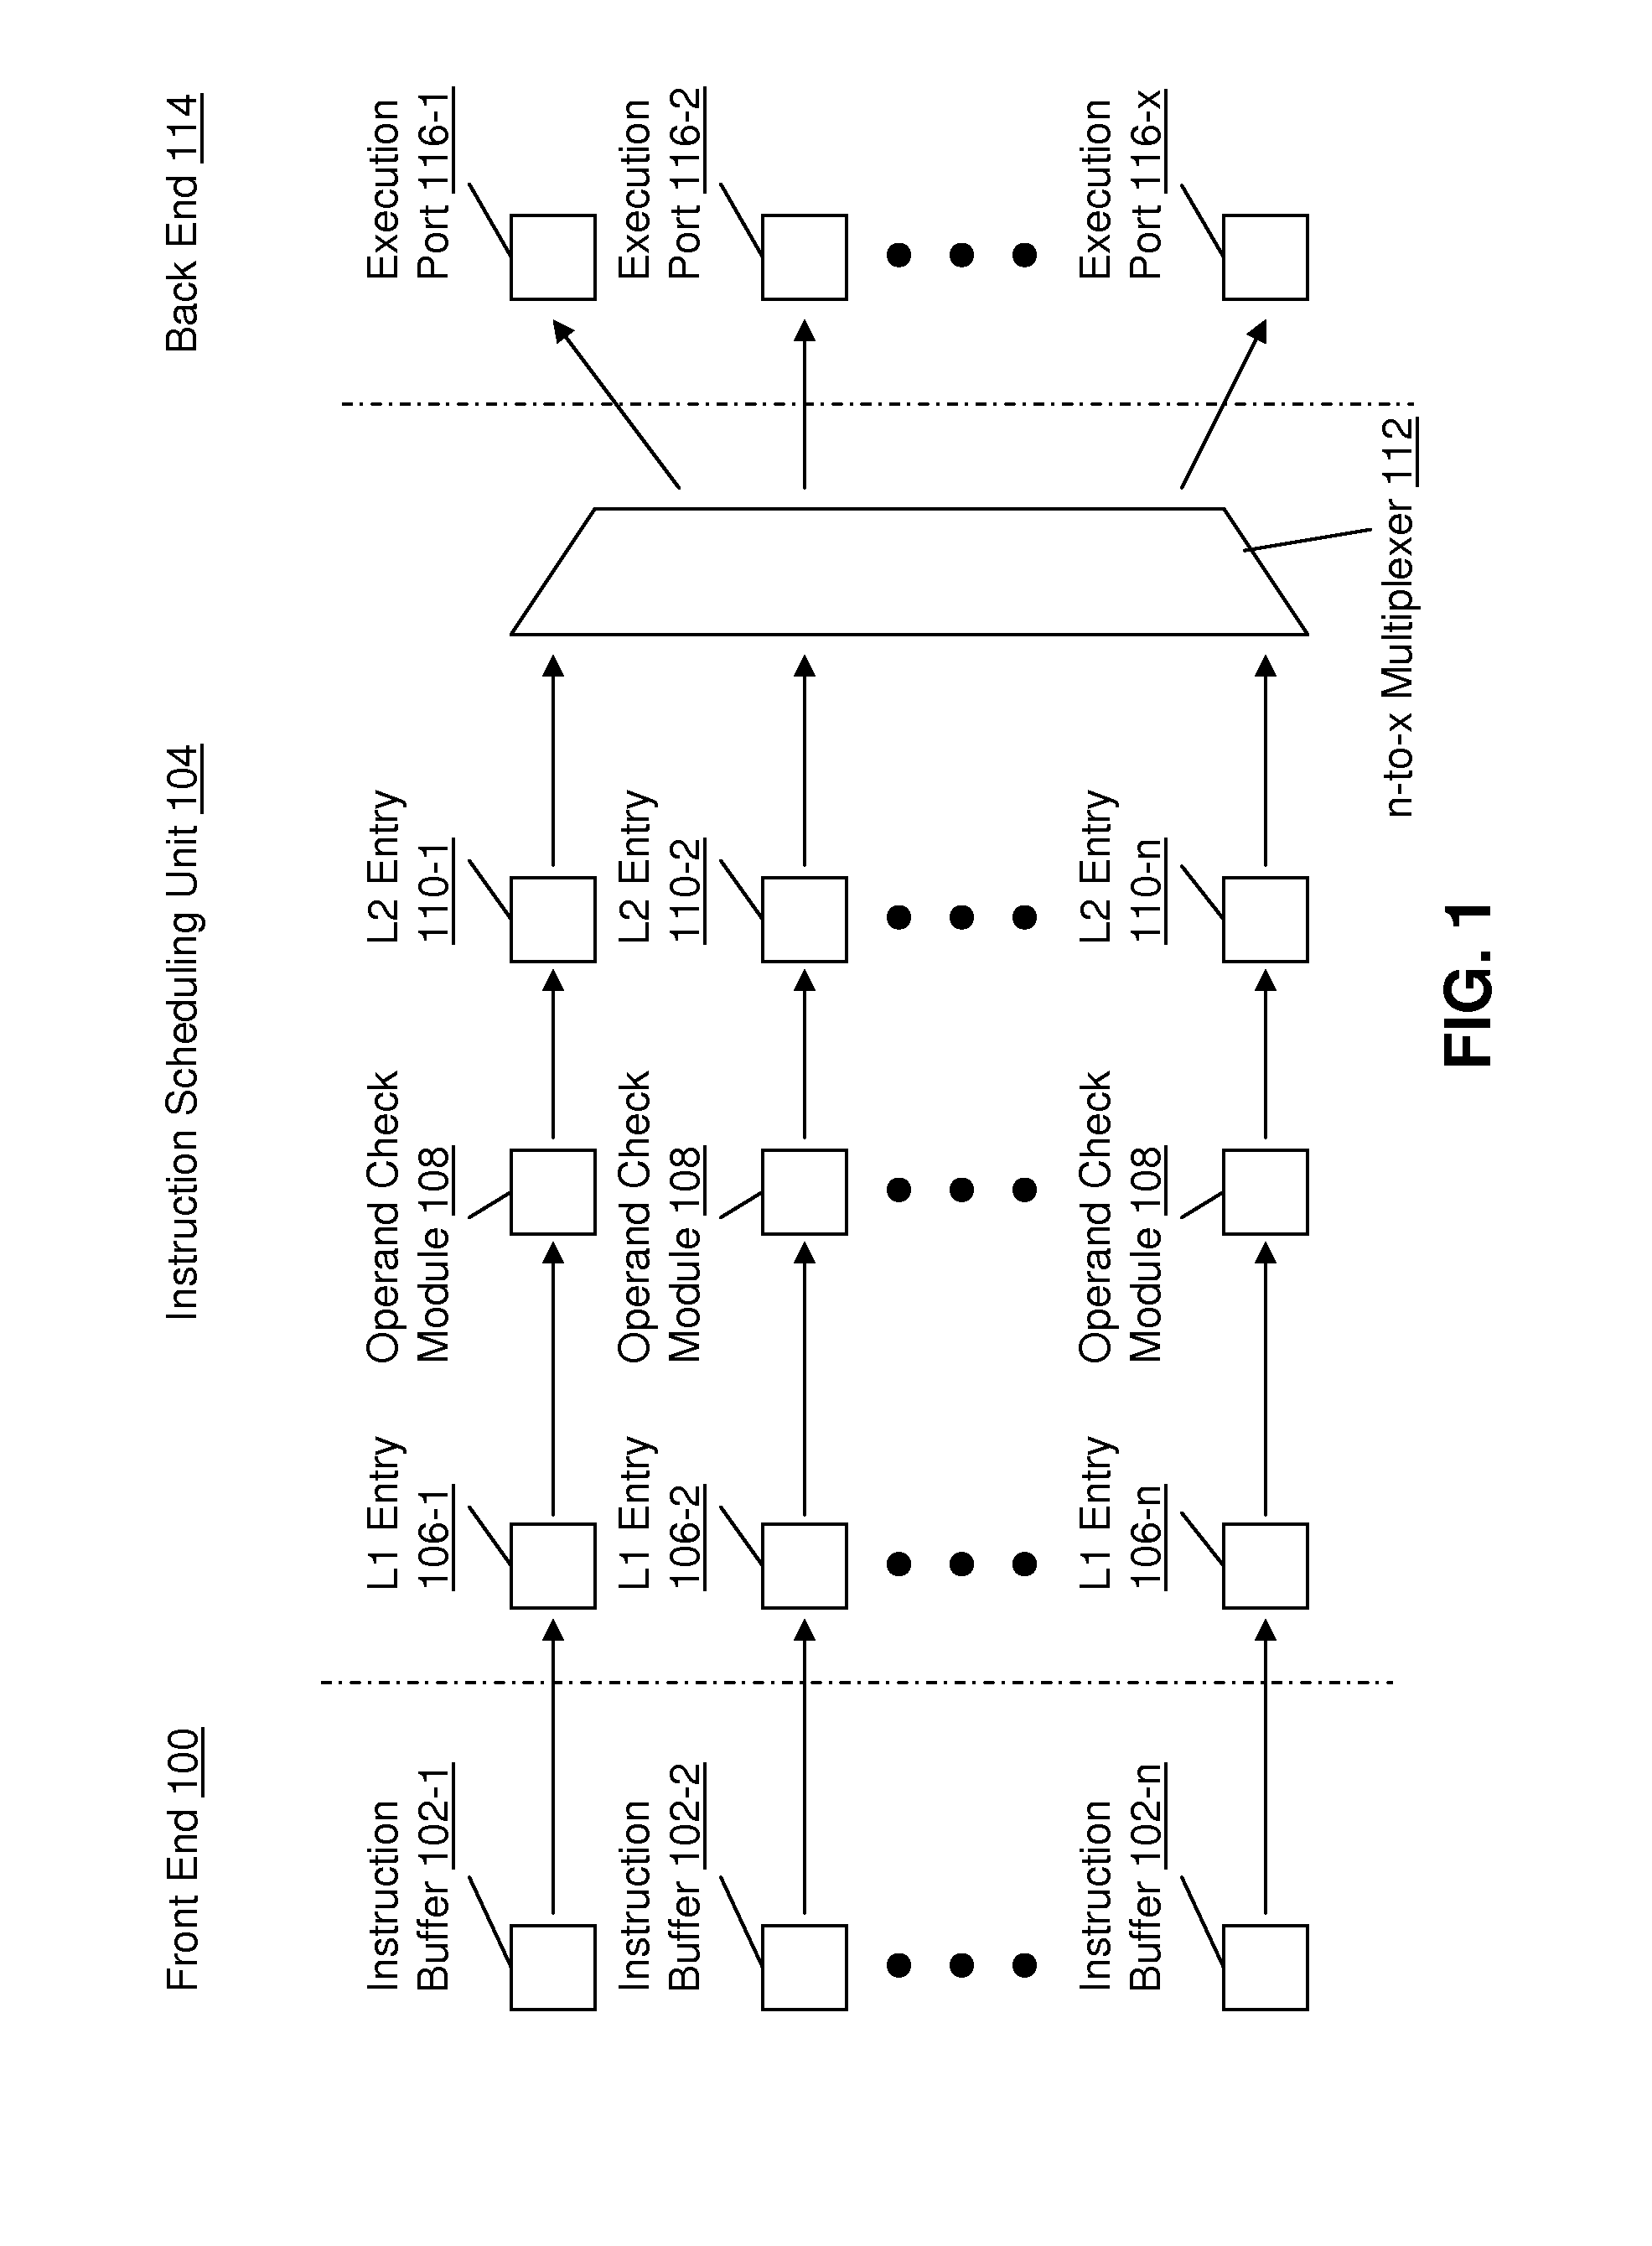 Instruction scheduling for a multi-strand out-of-order processor